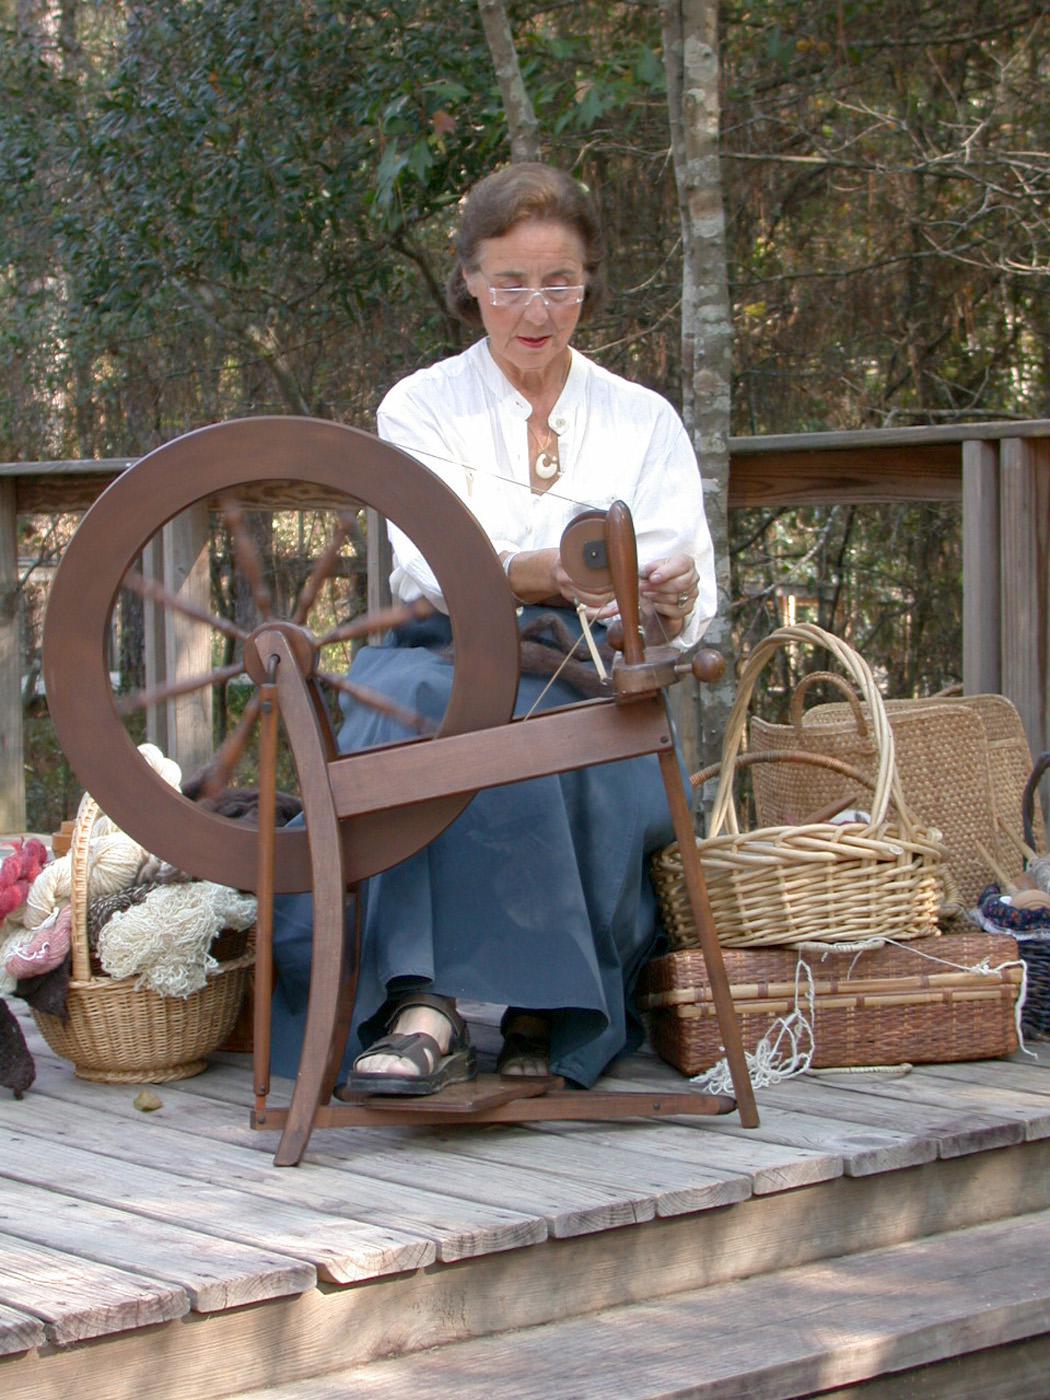 Yvette Rosen demonstrates spinning to guests of a previous Piney Woods Heritage Festival at Crosby Arboretum. The festival provides an opportunity to learn about the arts and heritage crafts of the region. (Photo courtesy of Crosby Arboretum)